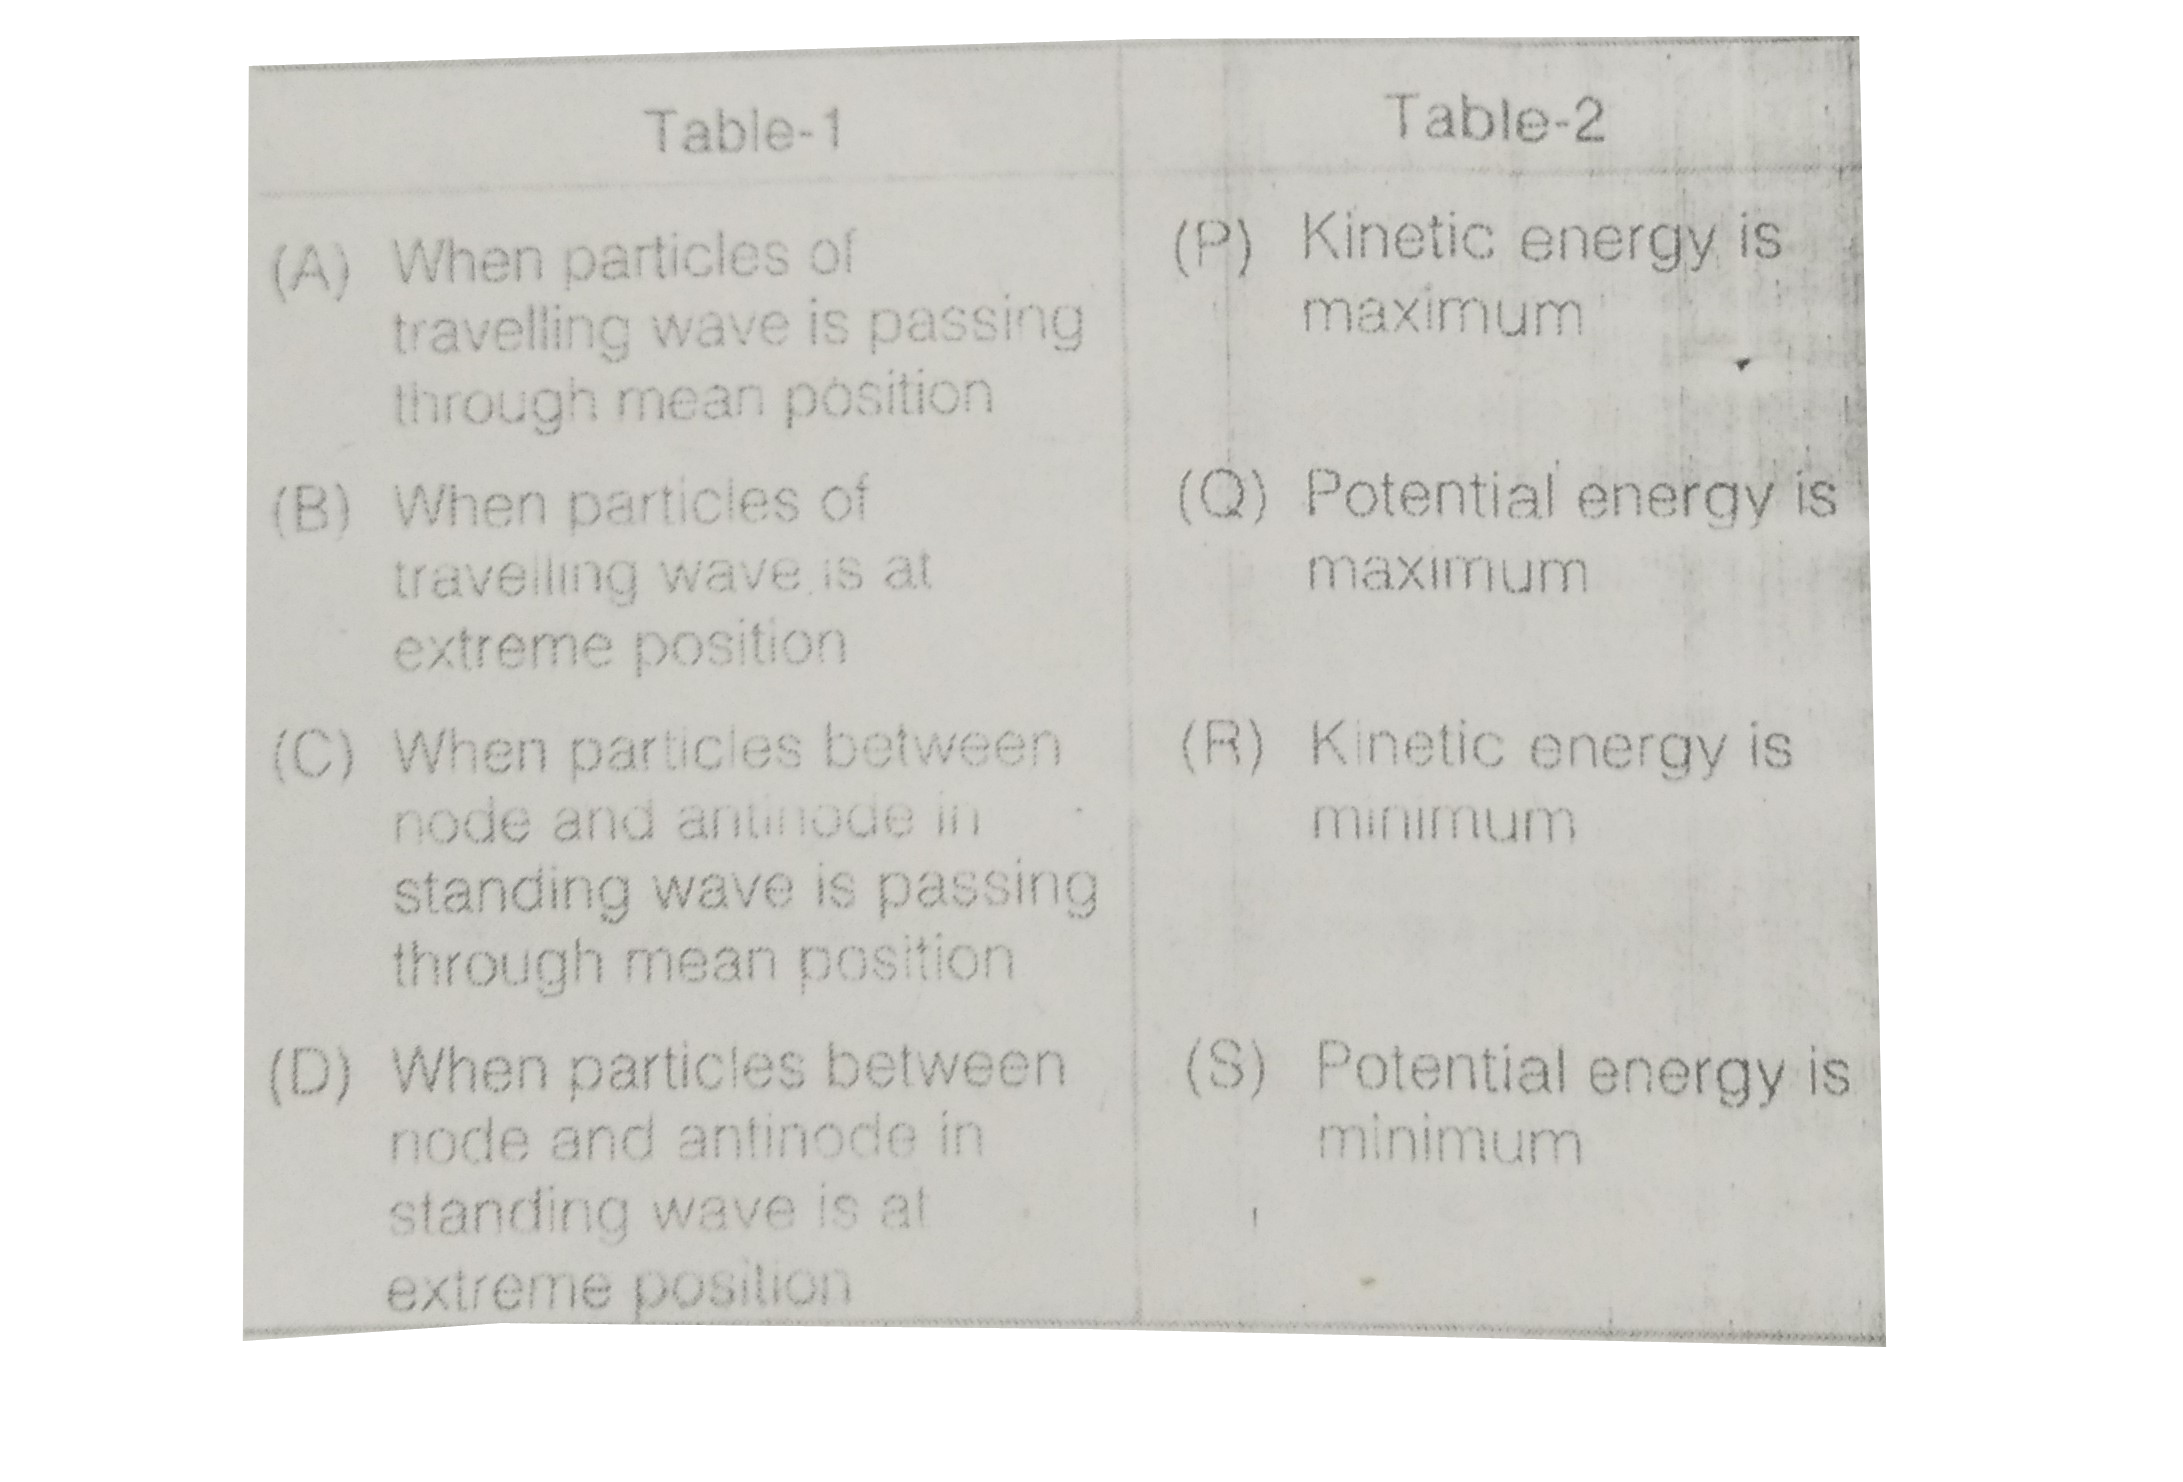 In case of mechanical wave a partical oscillates and during sacillation its kinetic energy and potential  energy changes.